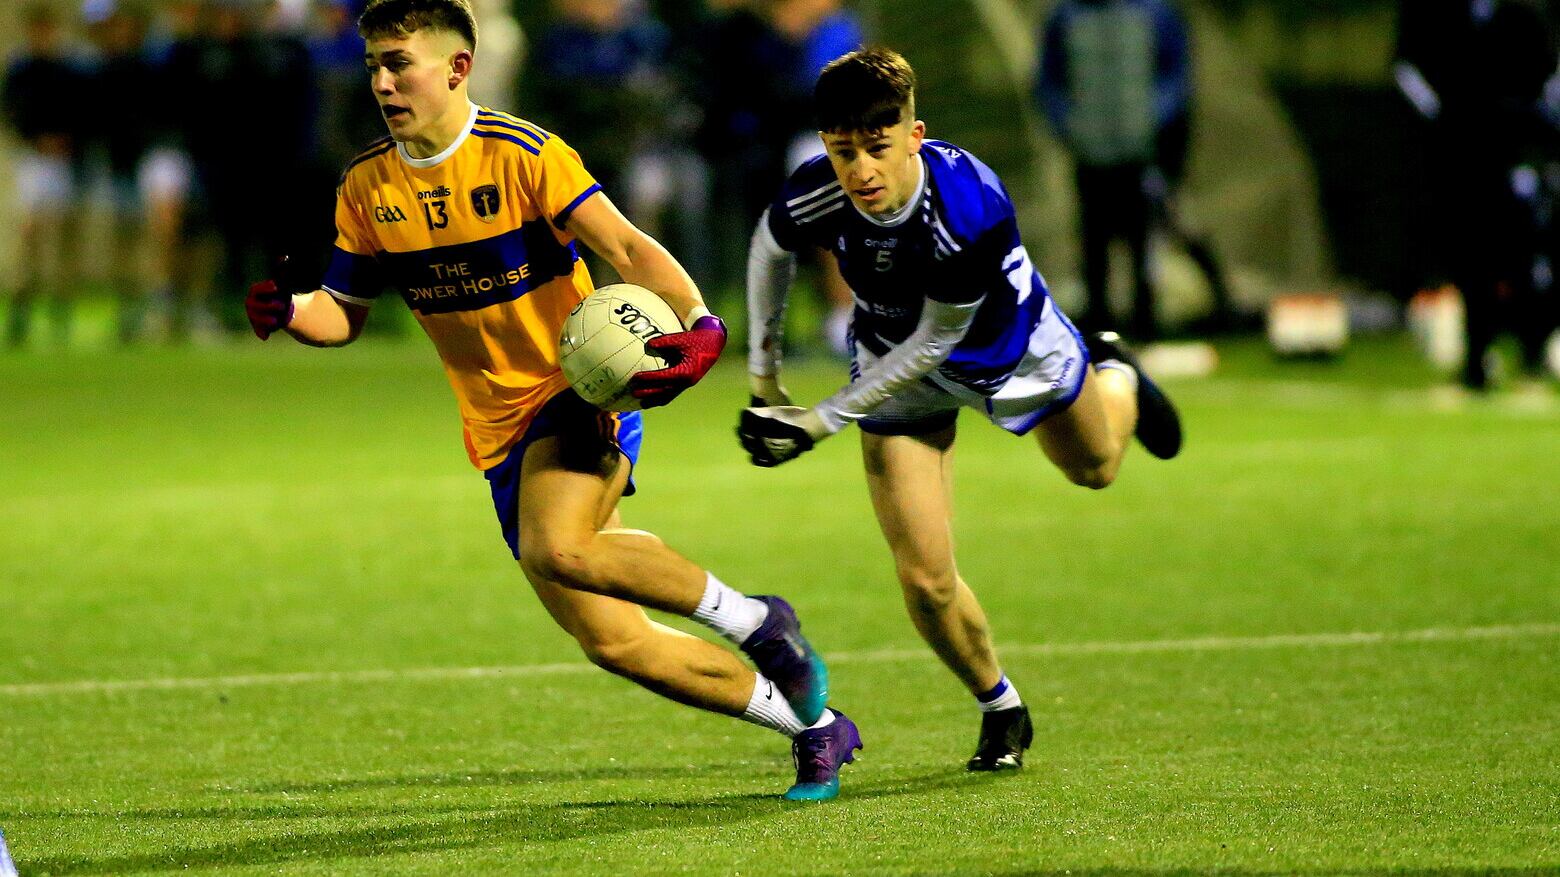 Noah Grimes was among the scorers for St Joseph's, Donaghmore in their win over Holy Trinity Picture: Seamus Loughran